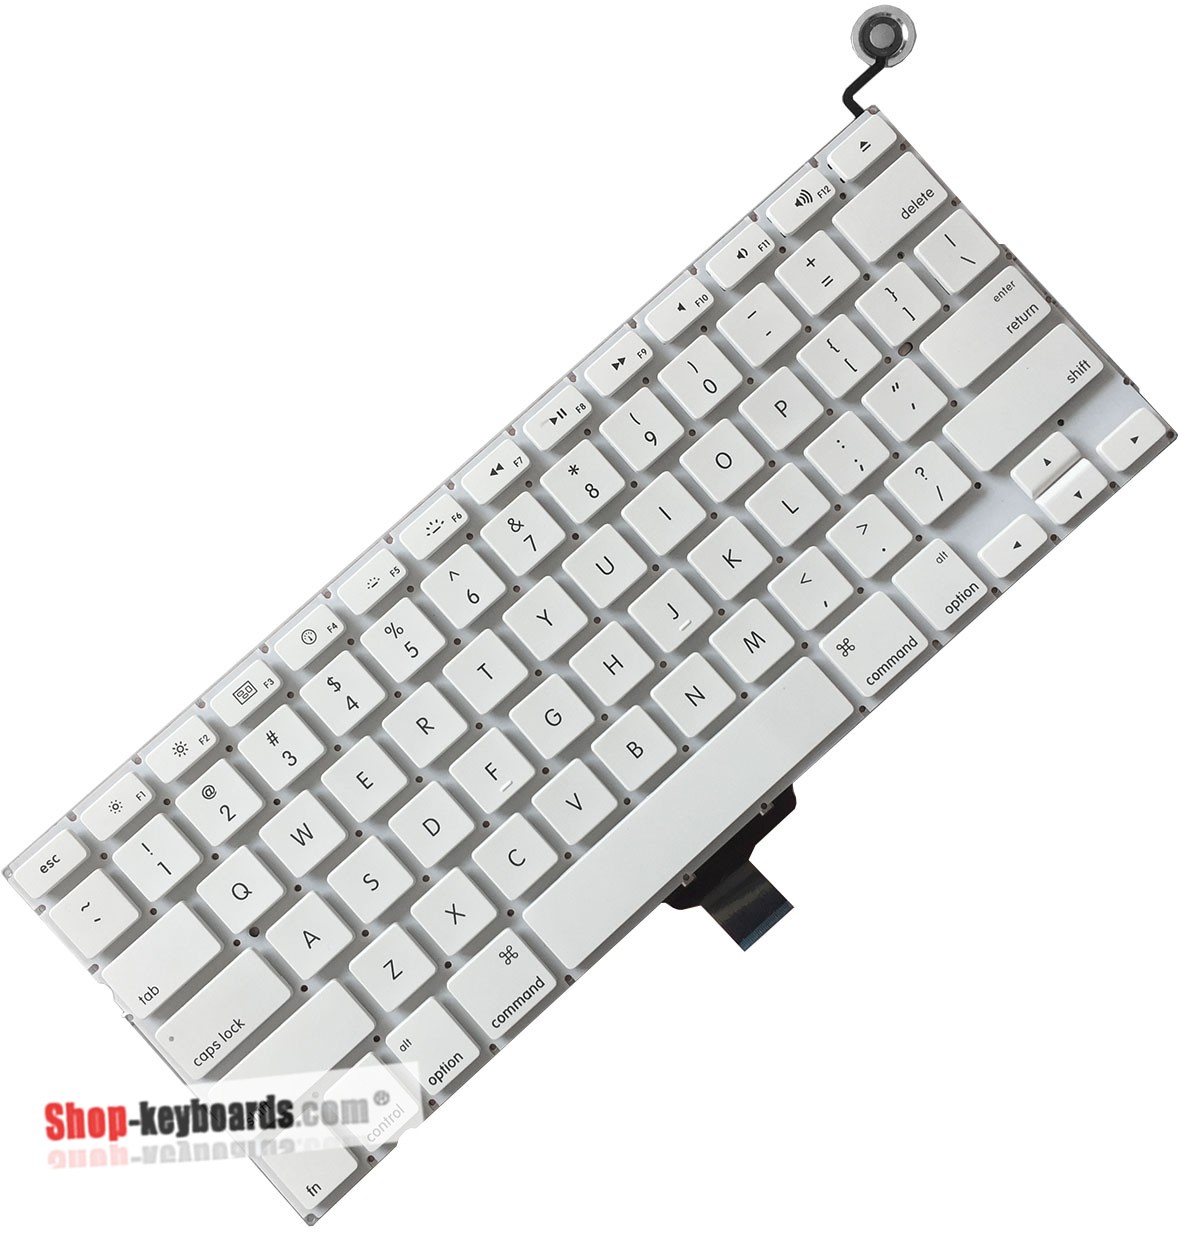 Apple MACBOOK UNIBODY 13 INCH A1342 (MID 2012) Keyboard replacement